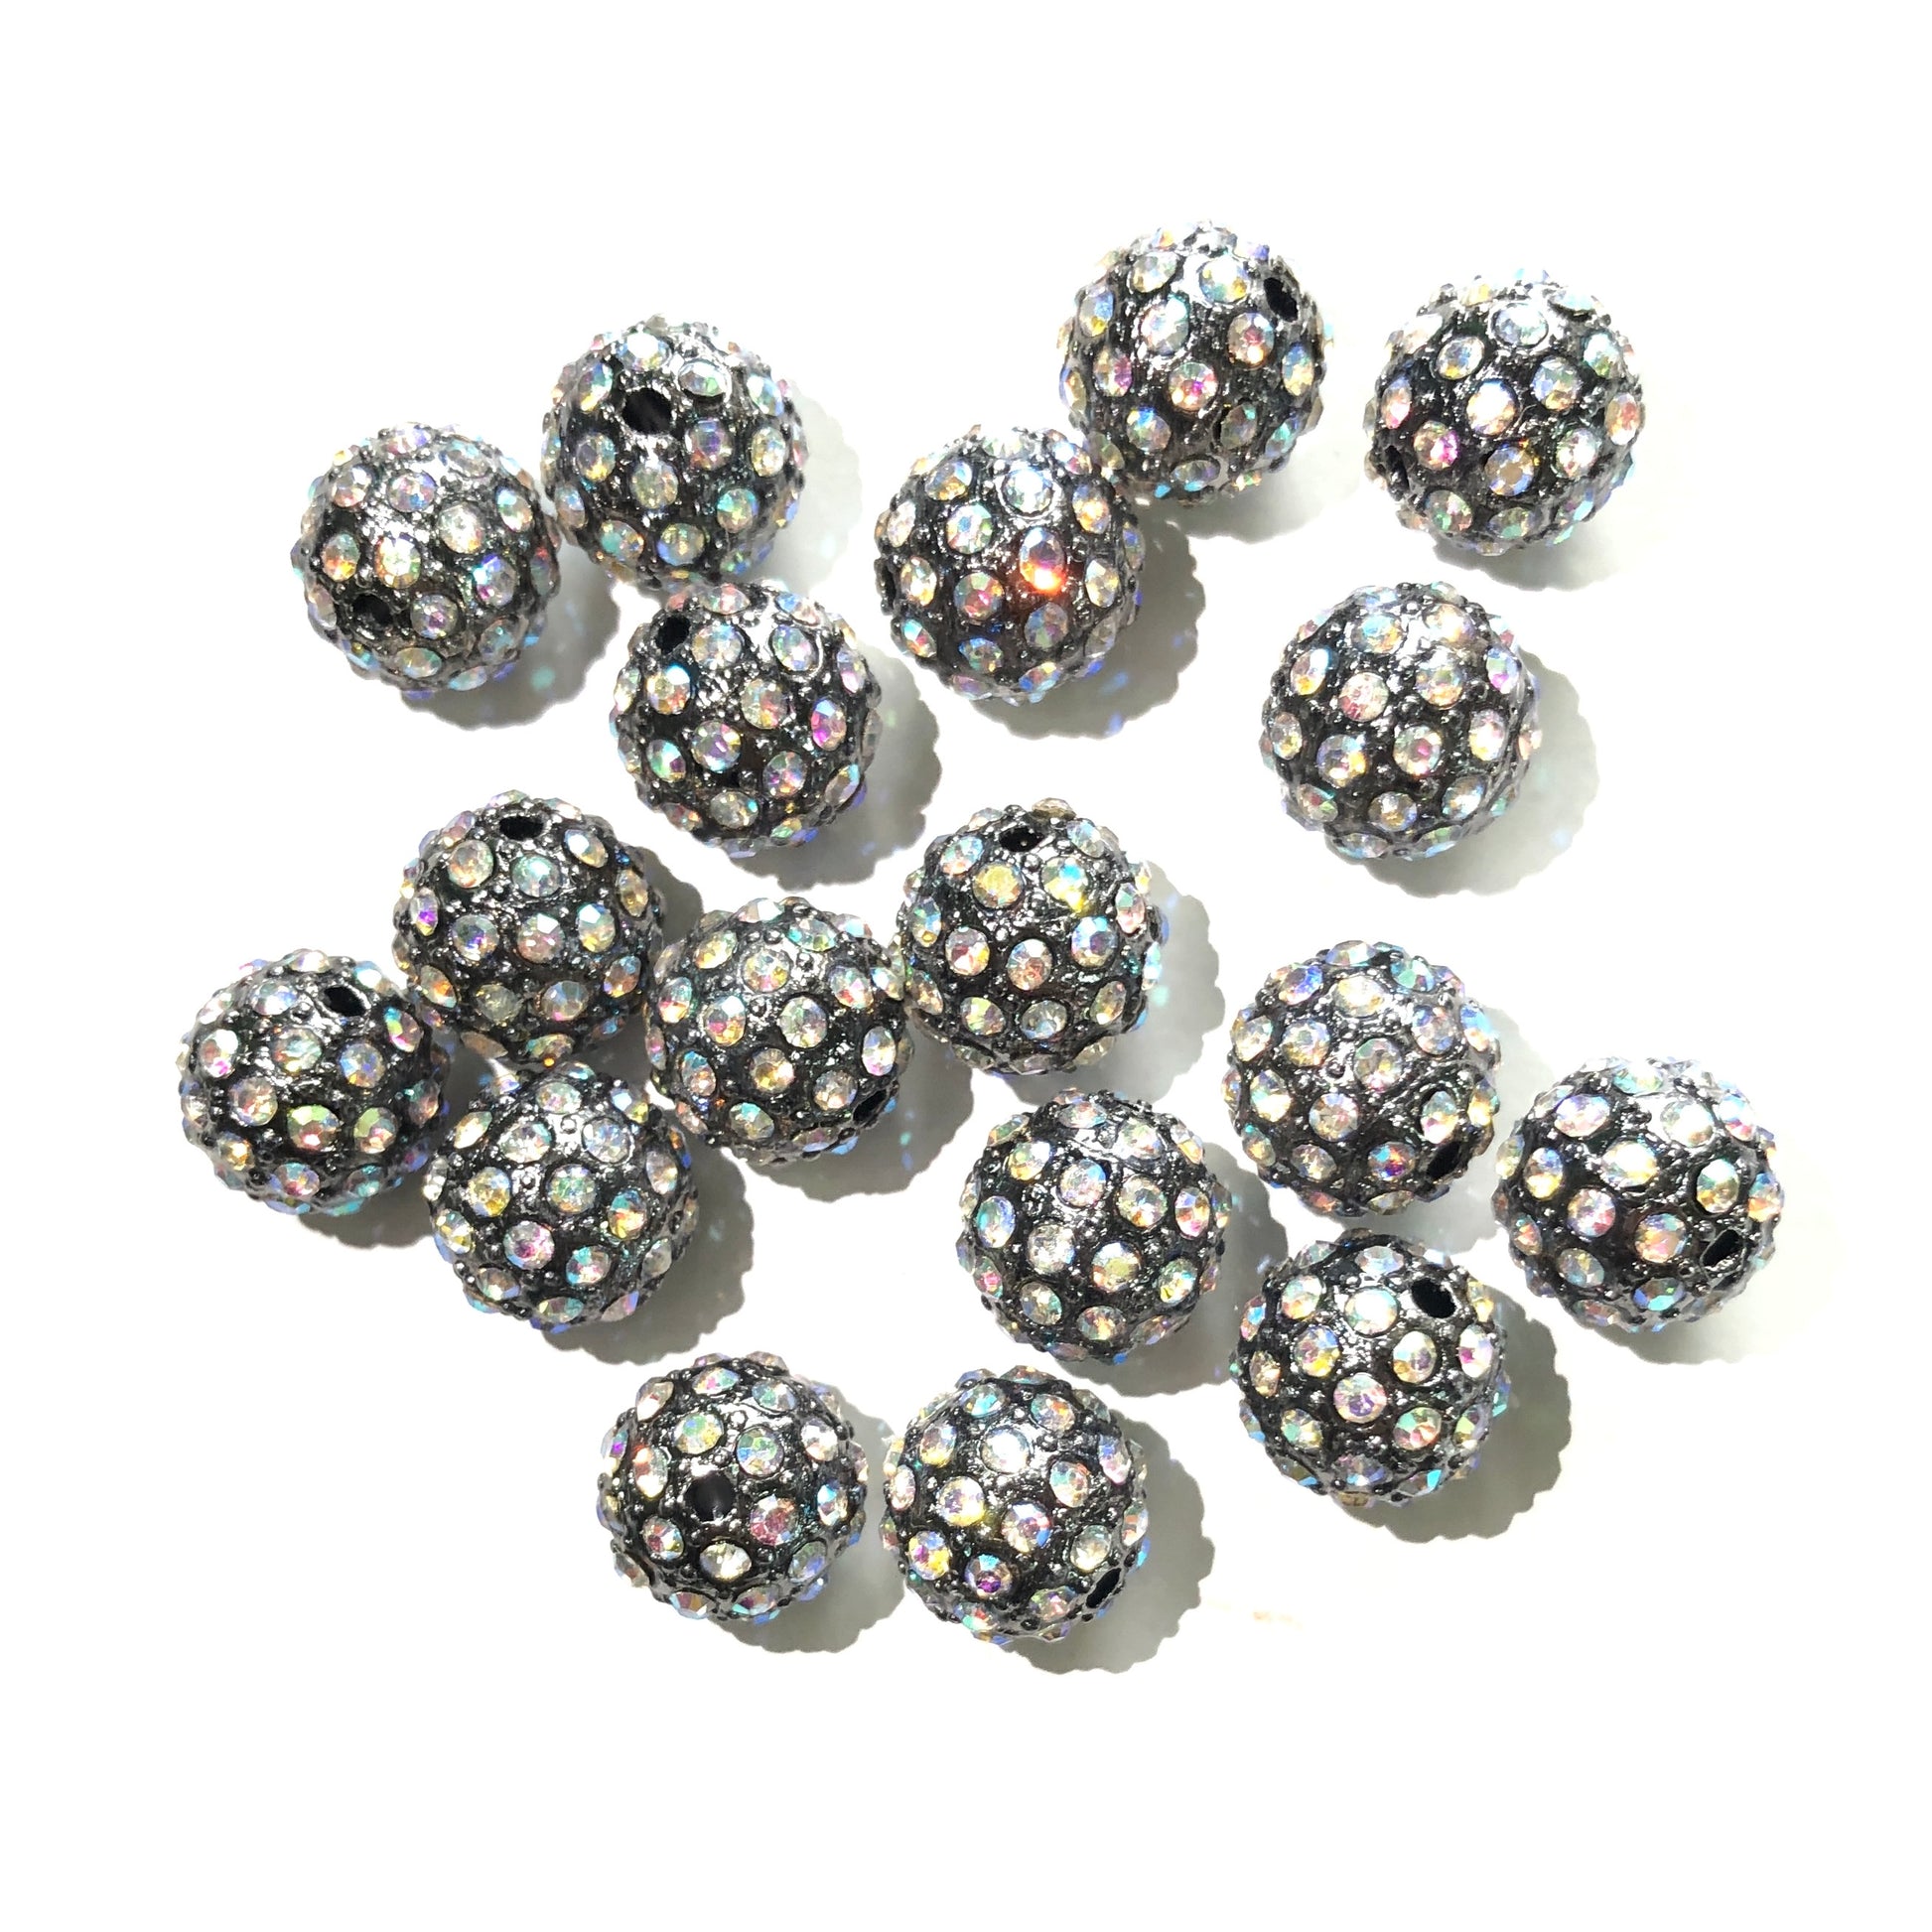 20-50pcs/lot 10mm Clear AB Rhinestone Paved Alloy Ball Spacers-Black Alloy Spacers & Wholesale Charms Beads Beyond